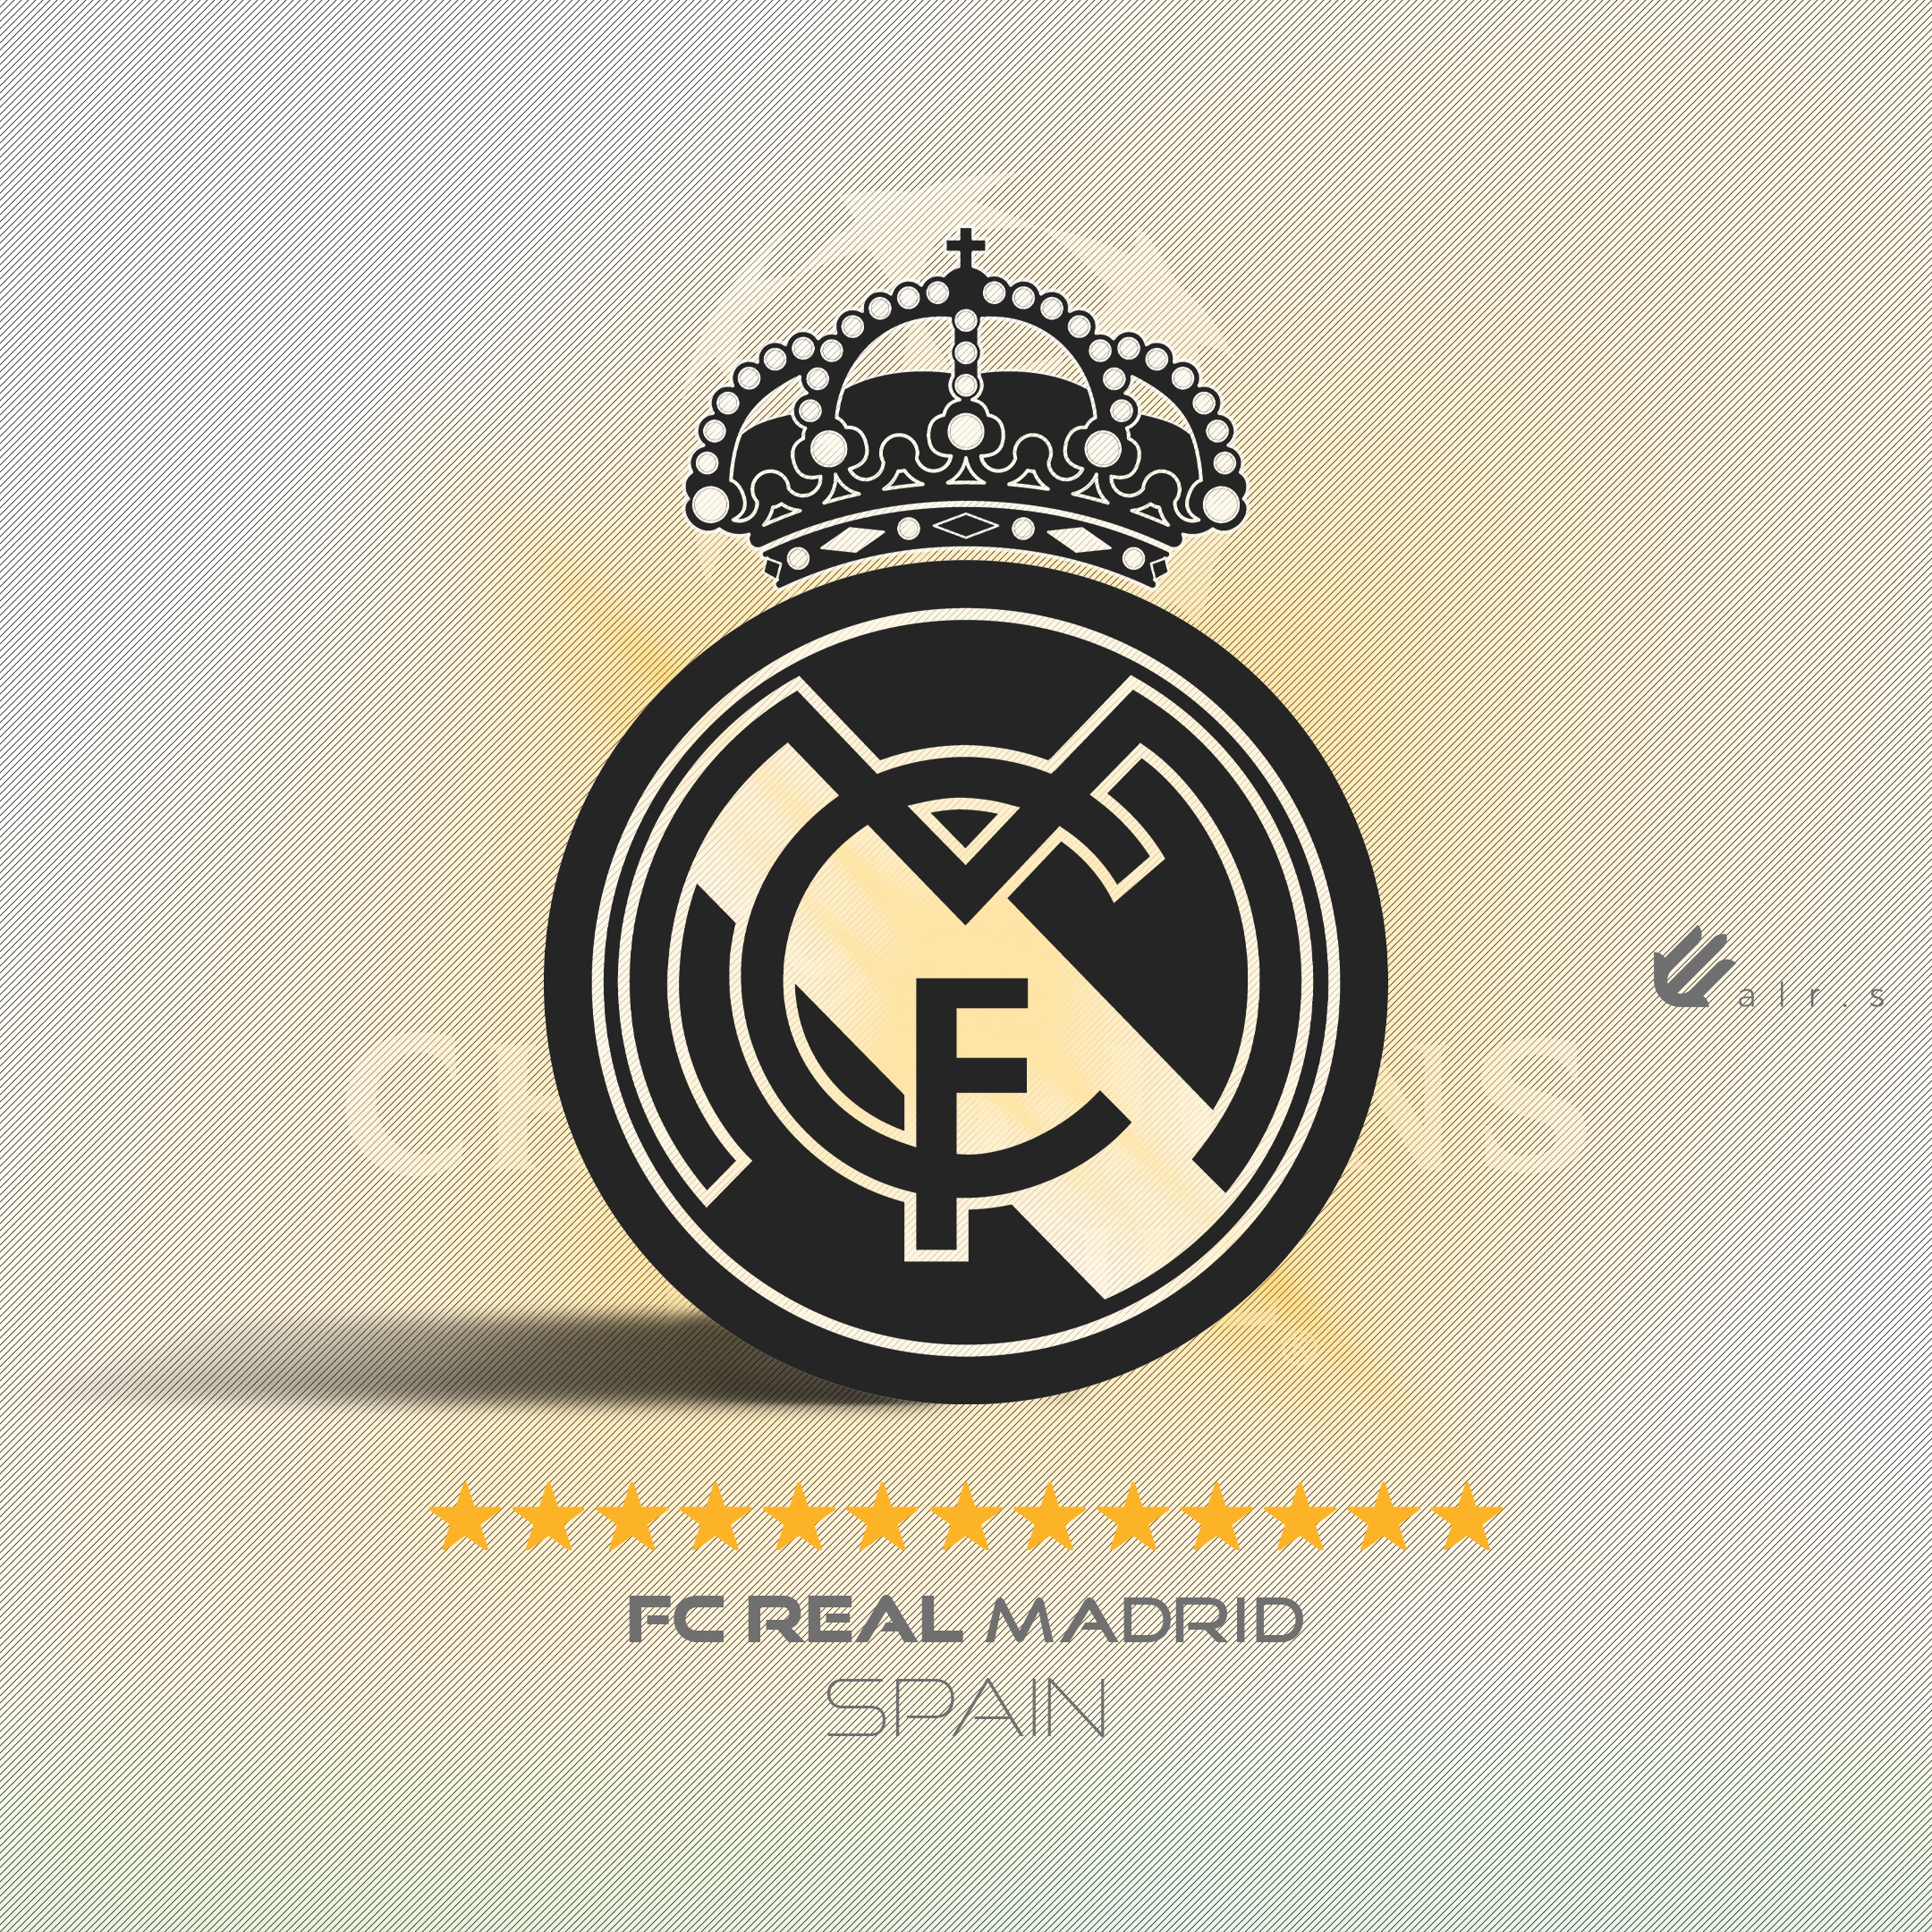 2160x2160 Football Real Madrid Logo Champions League Clubs Graphic Design Creativity Photography Colorful Socc Wallpaper Resolution: ID:1155851